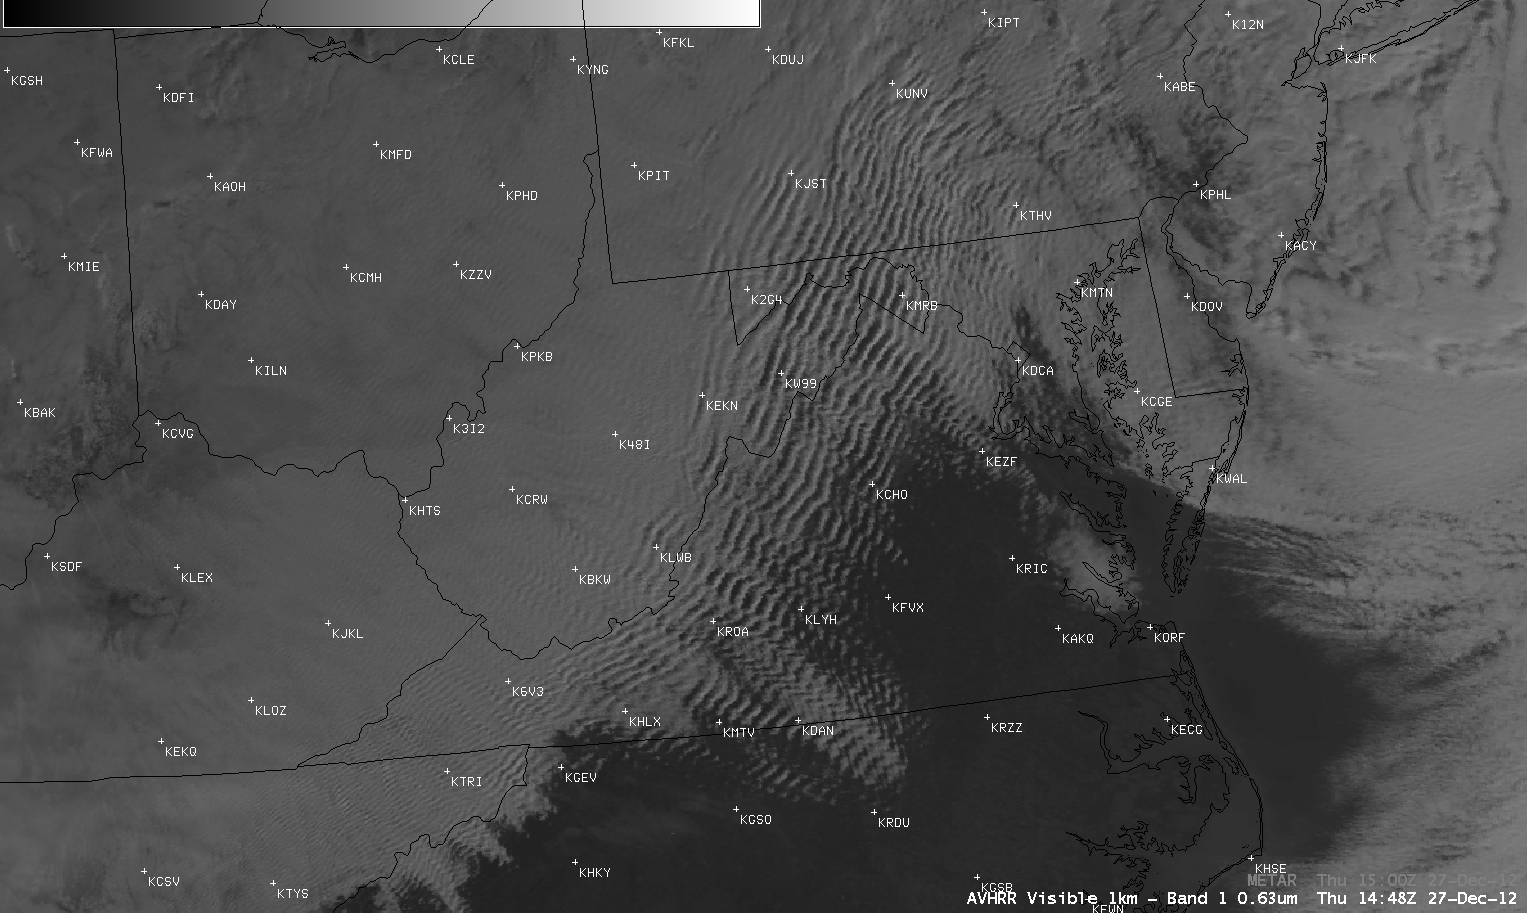 POES AVHRR 0.63 Âµm visible channel image with METAR surface reports